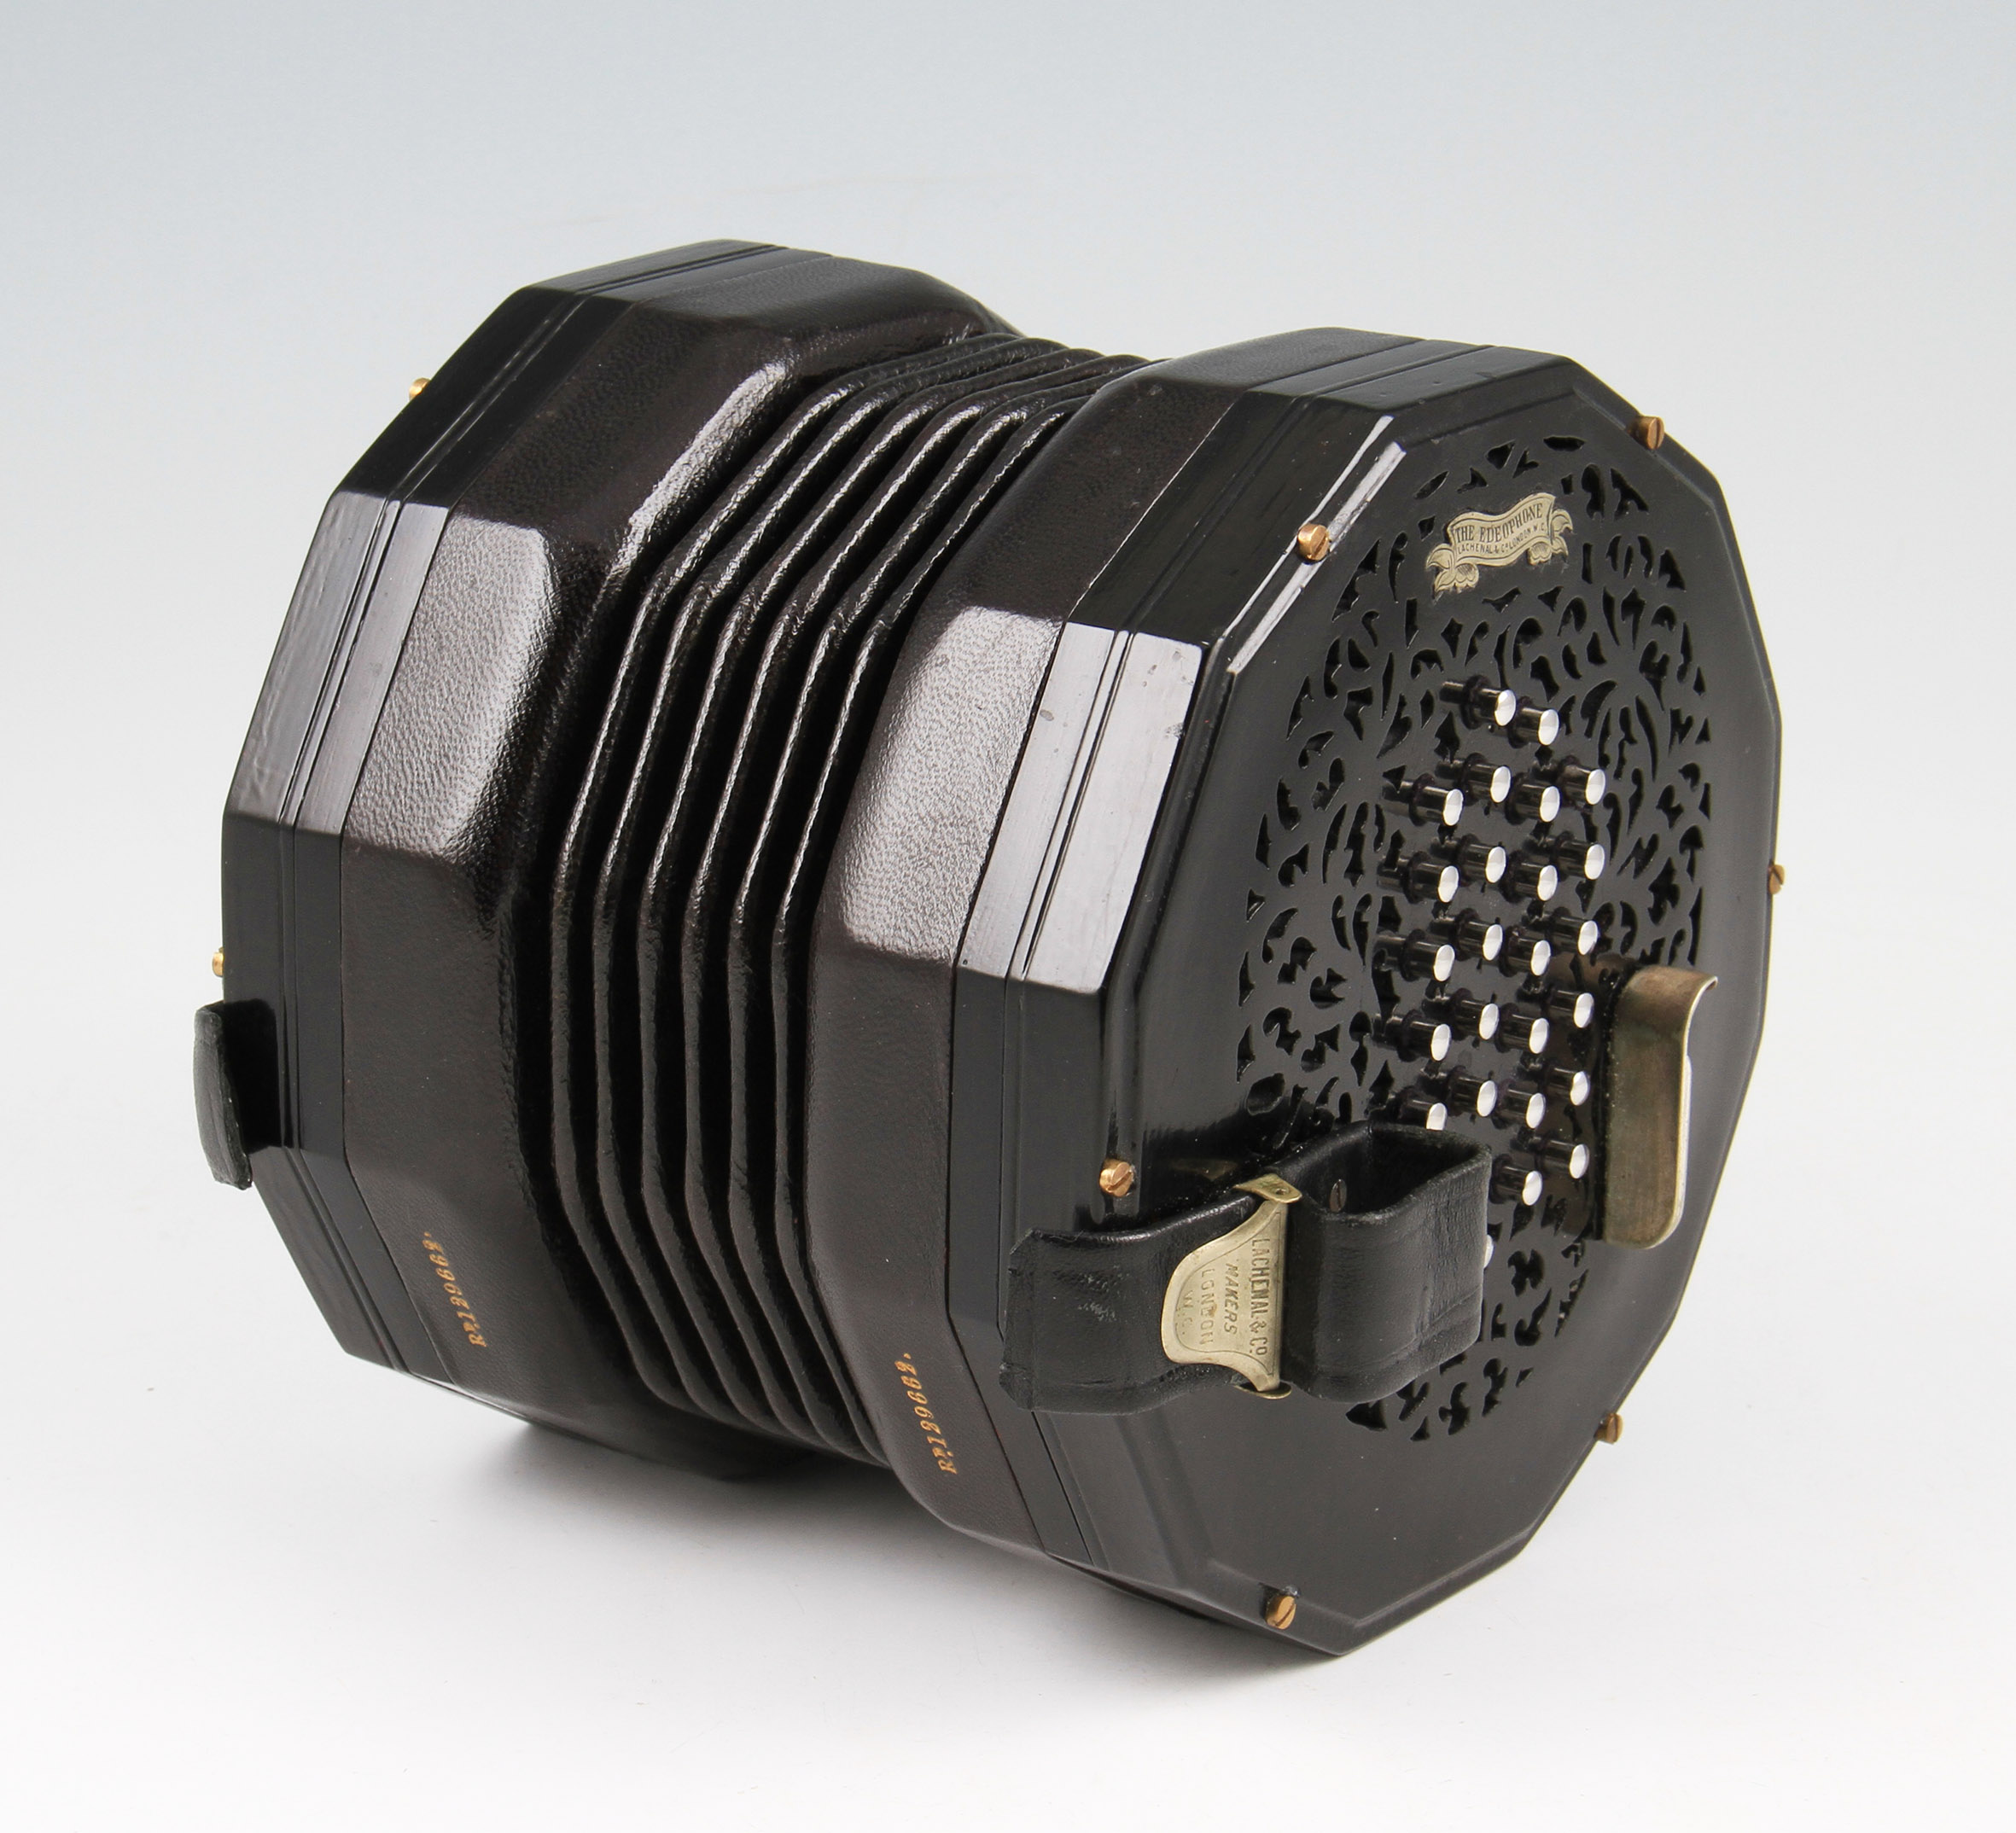 A Lachenal & Co 'The Edeophone' concertina, with black ebonized body with fretwork end sections with